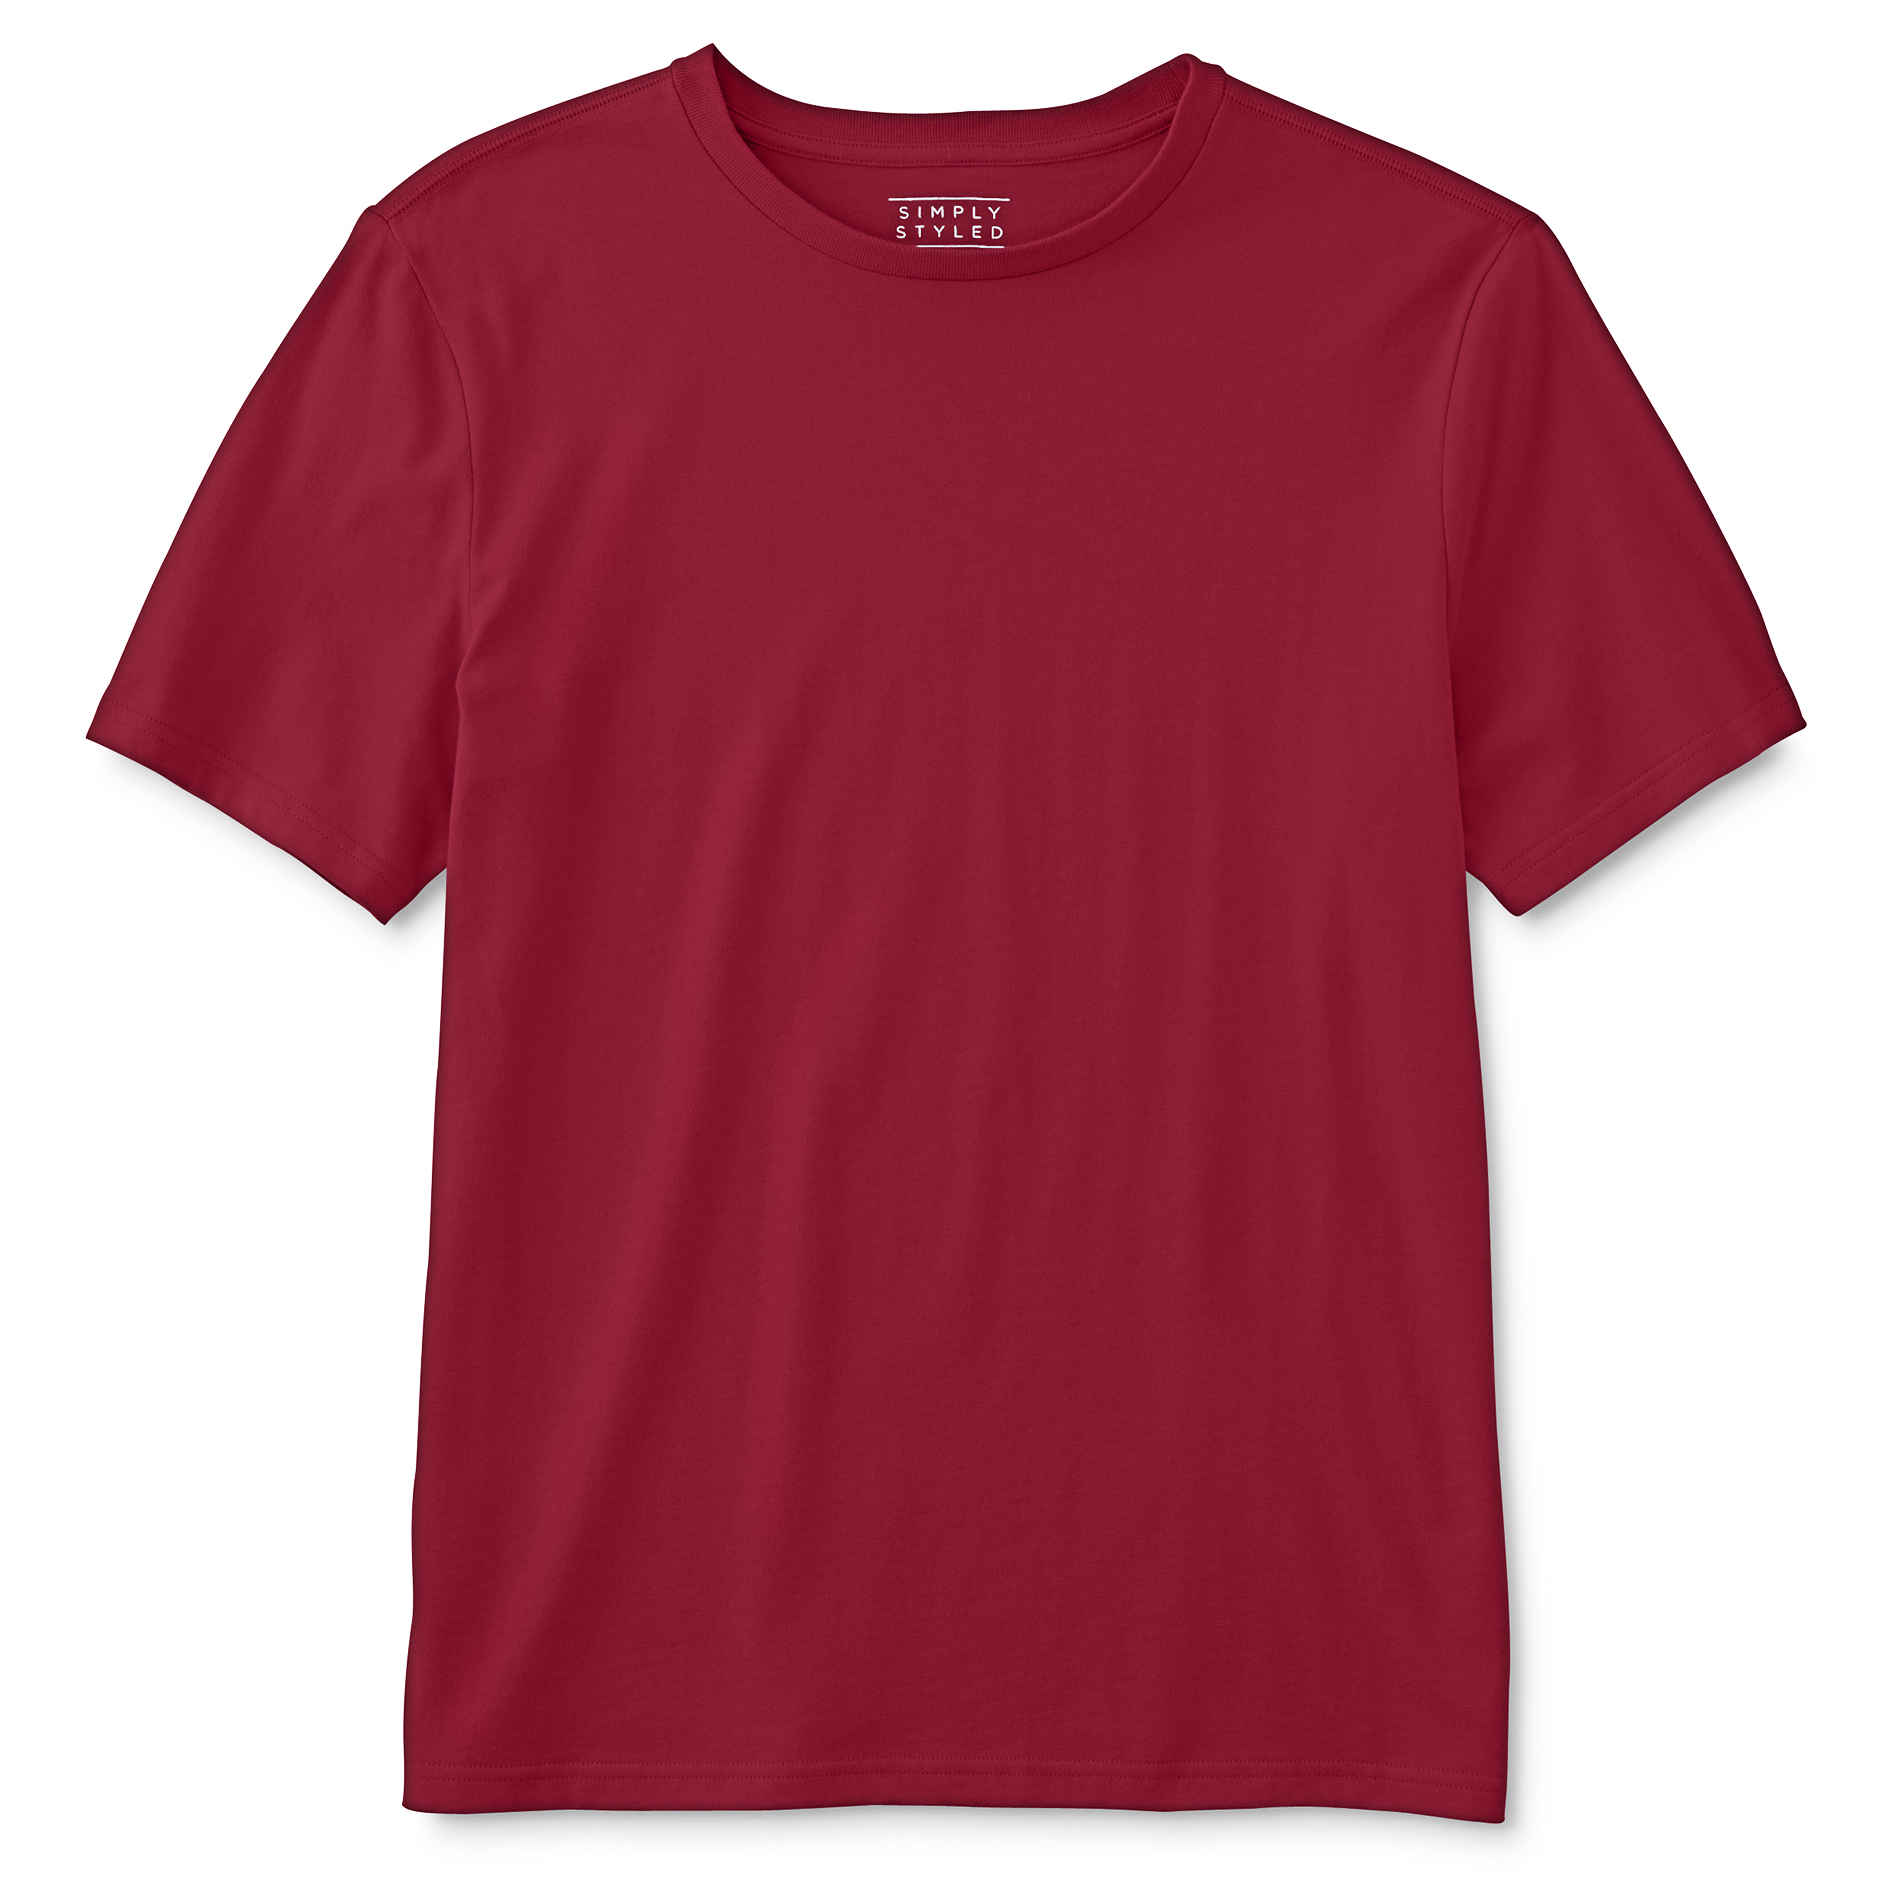 Simply Styled Men's T-Shirt